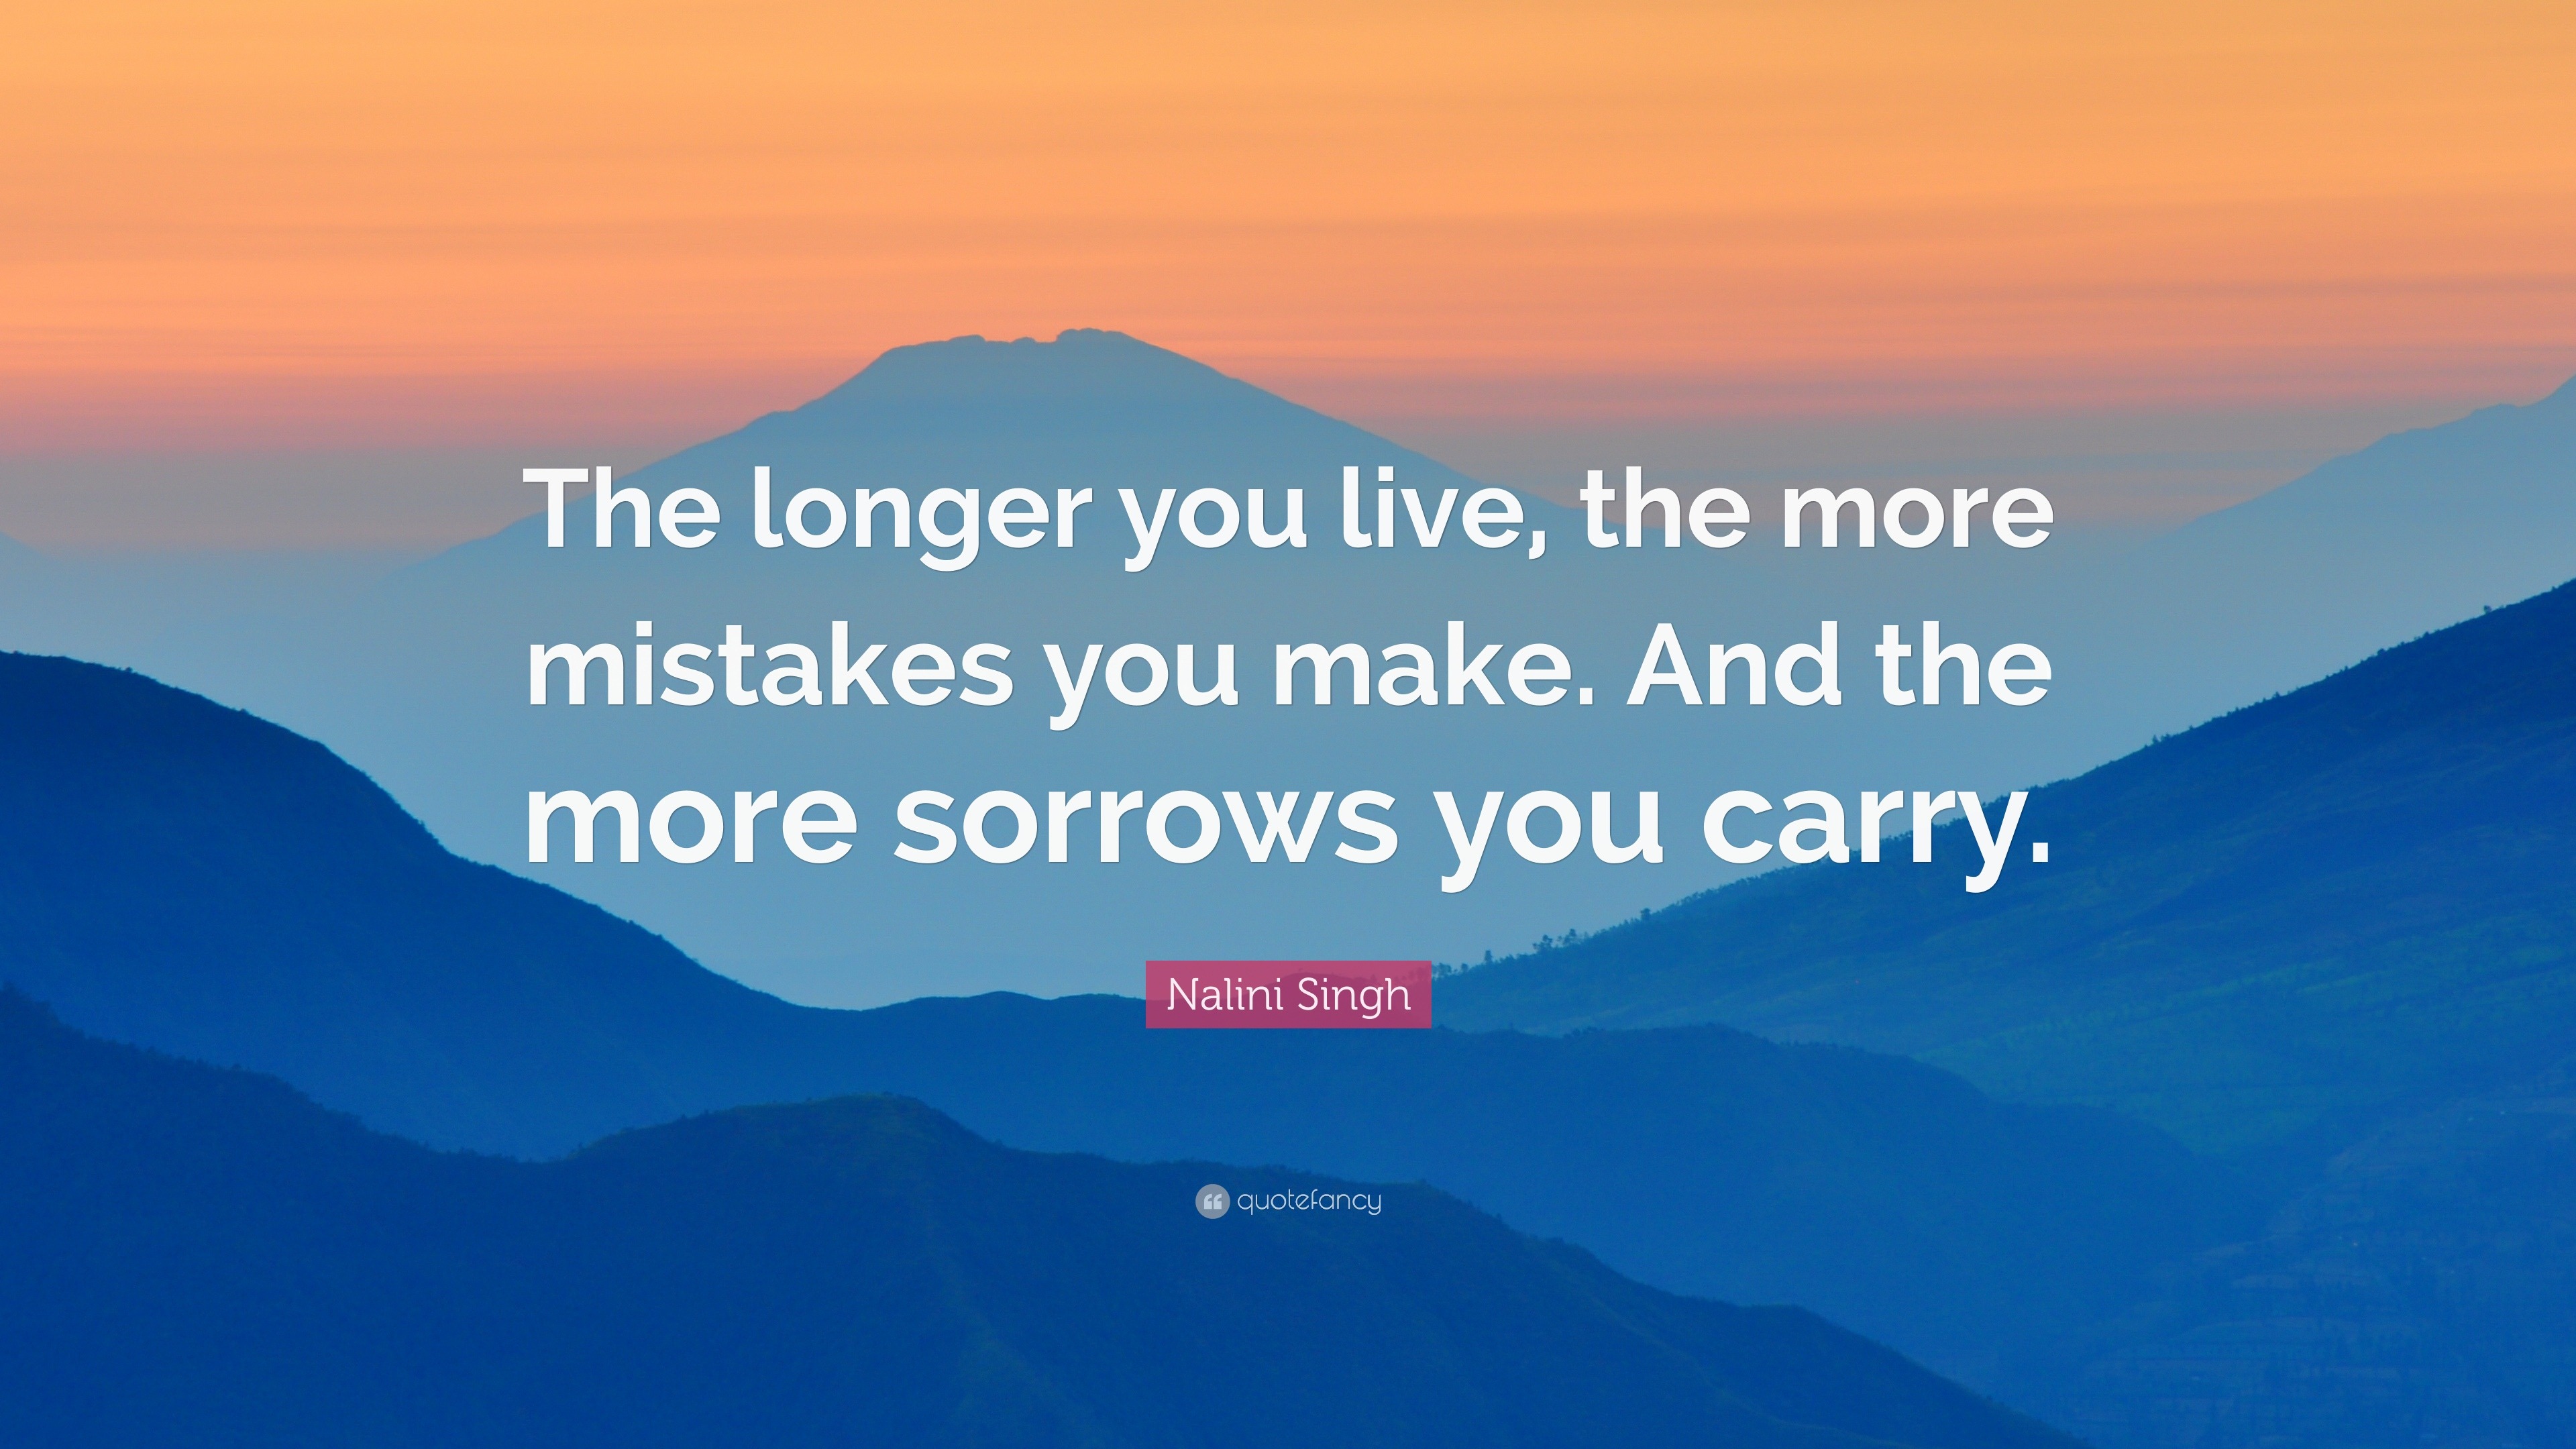 Nalini Singh Quote: “The longer you live, the more mistakes you make ...